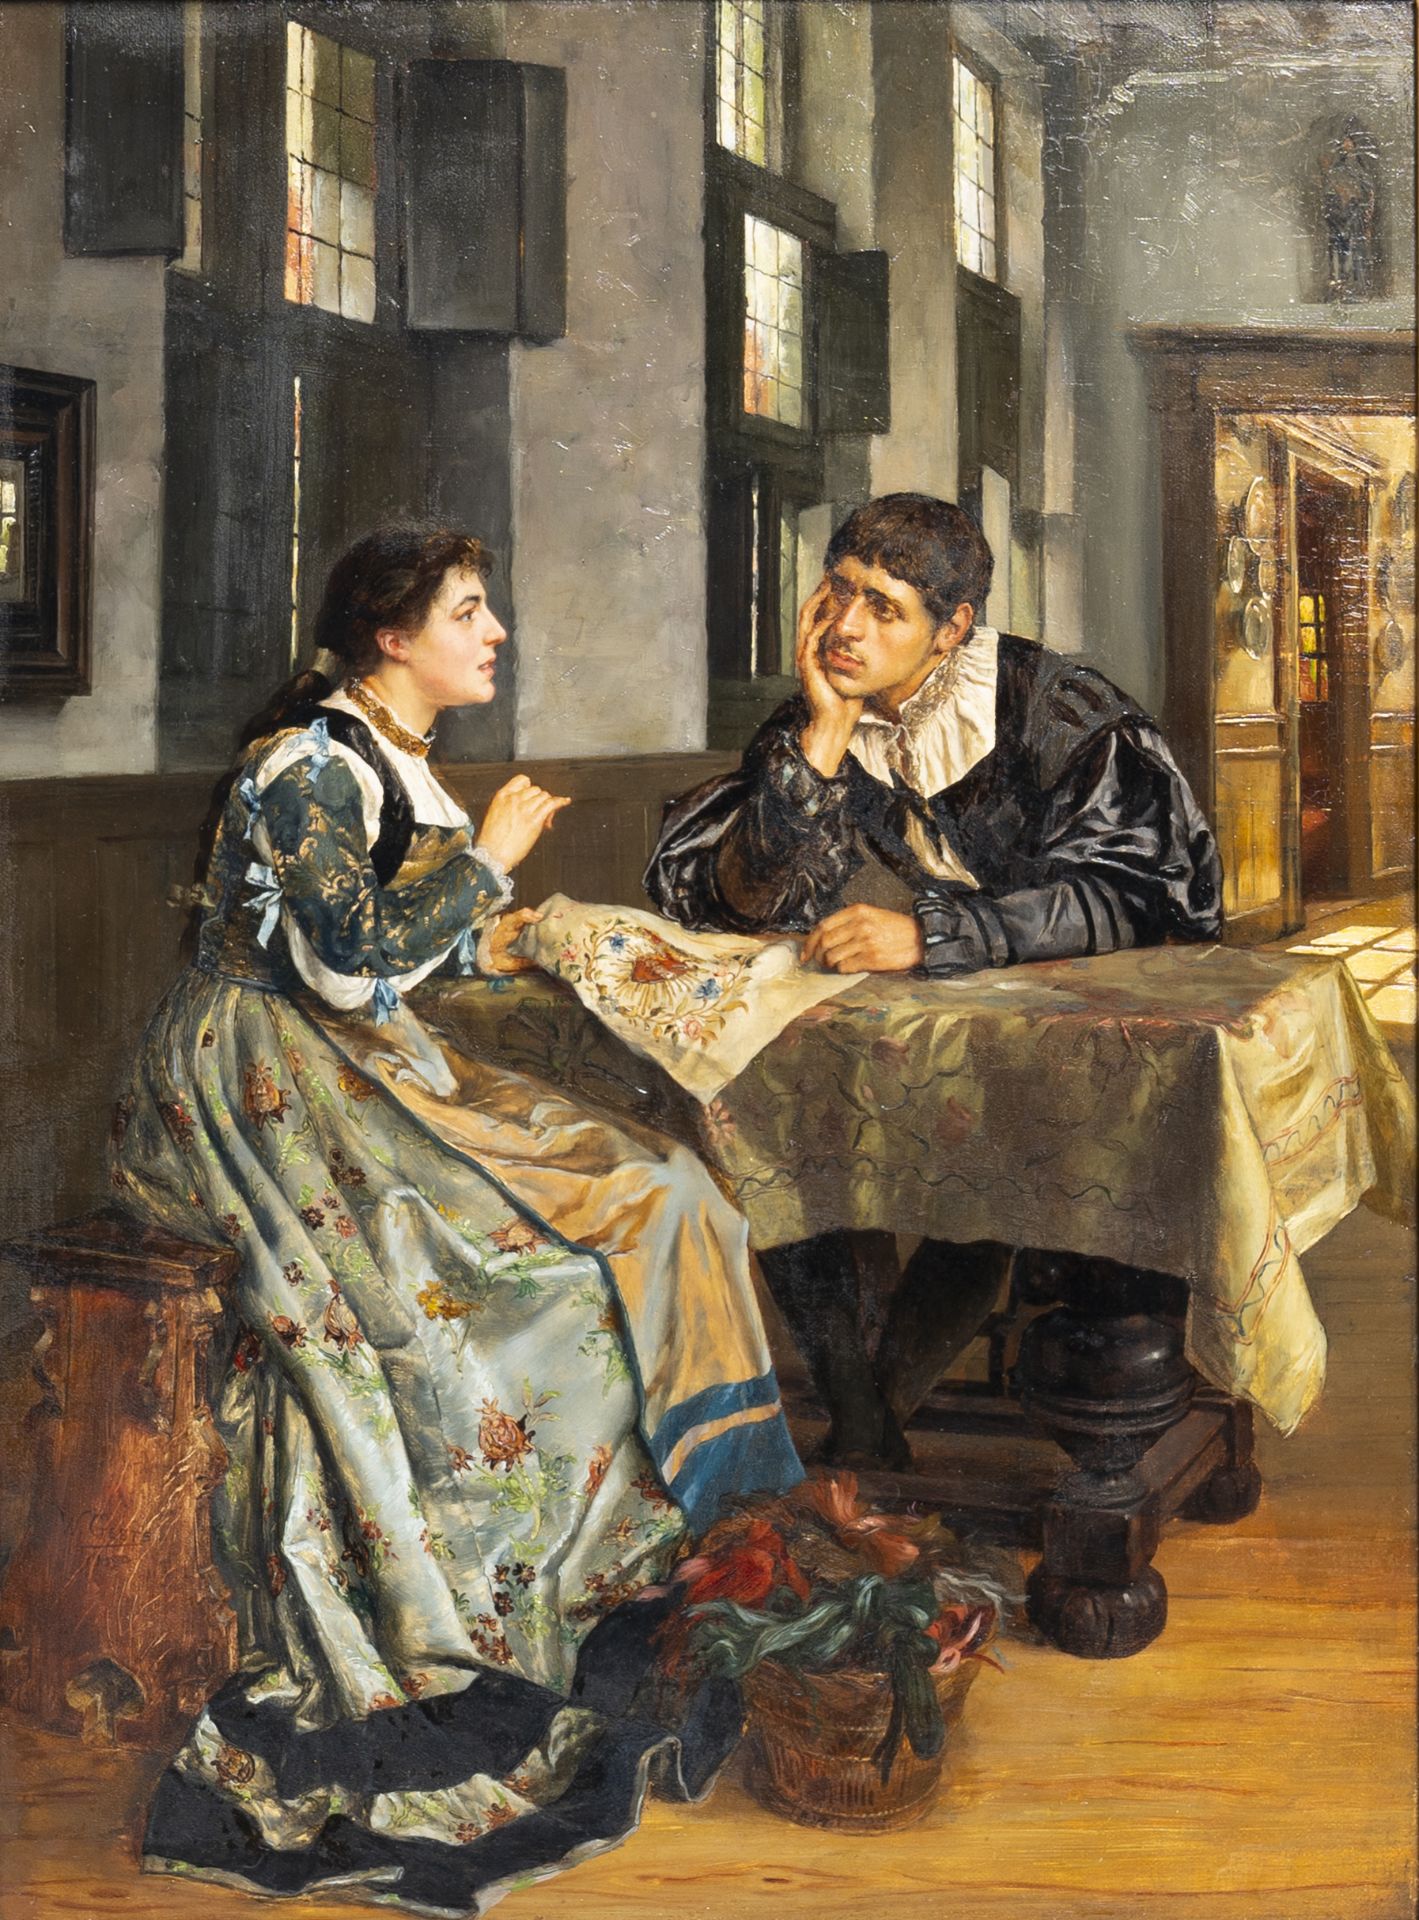 Willem Geets (1838-1919): The conversation, oil on panel, dated 1890